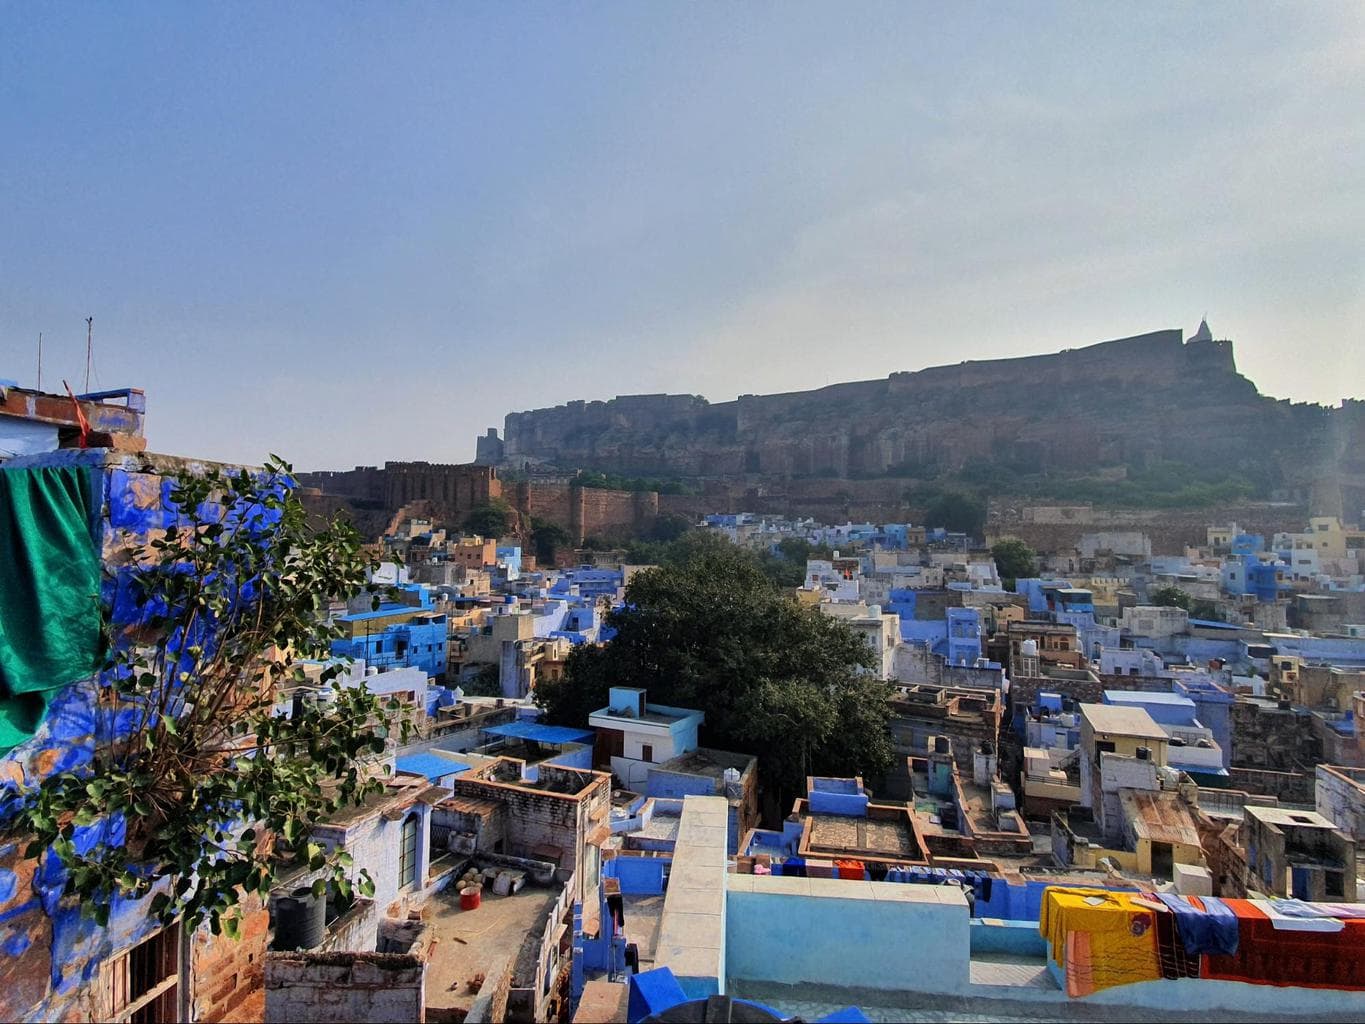 The Blue City of Jodhpur, just behind the fort